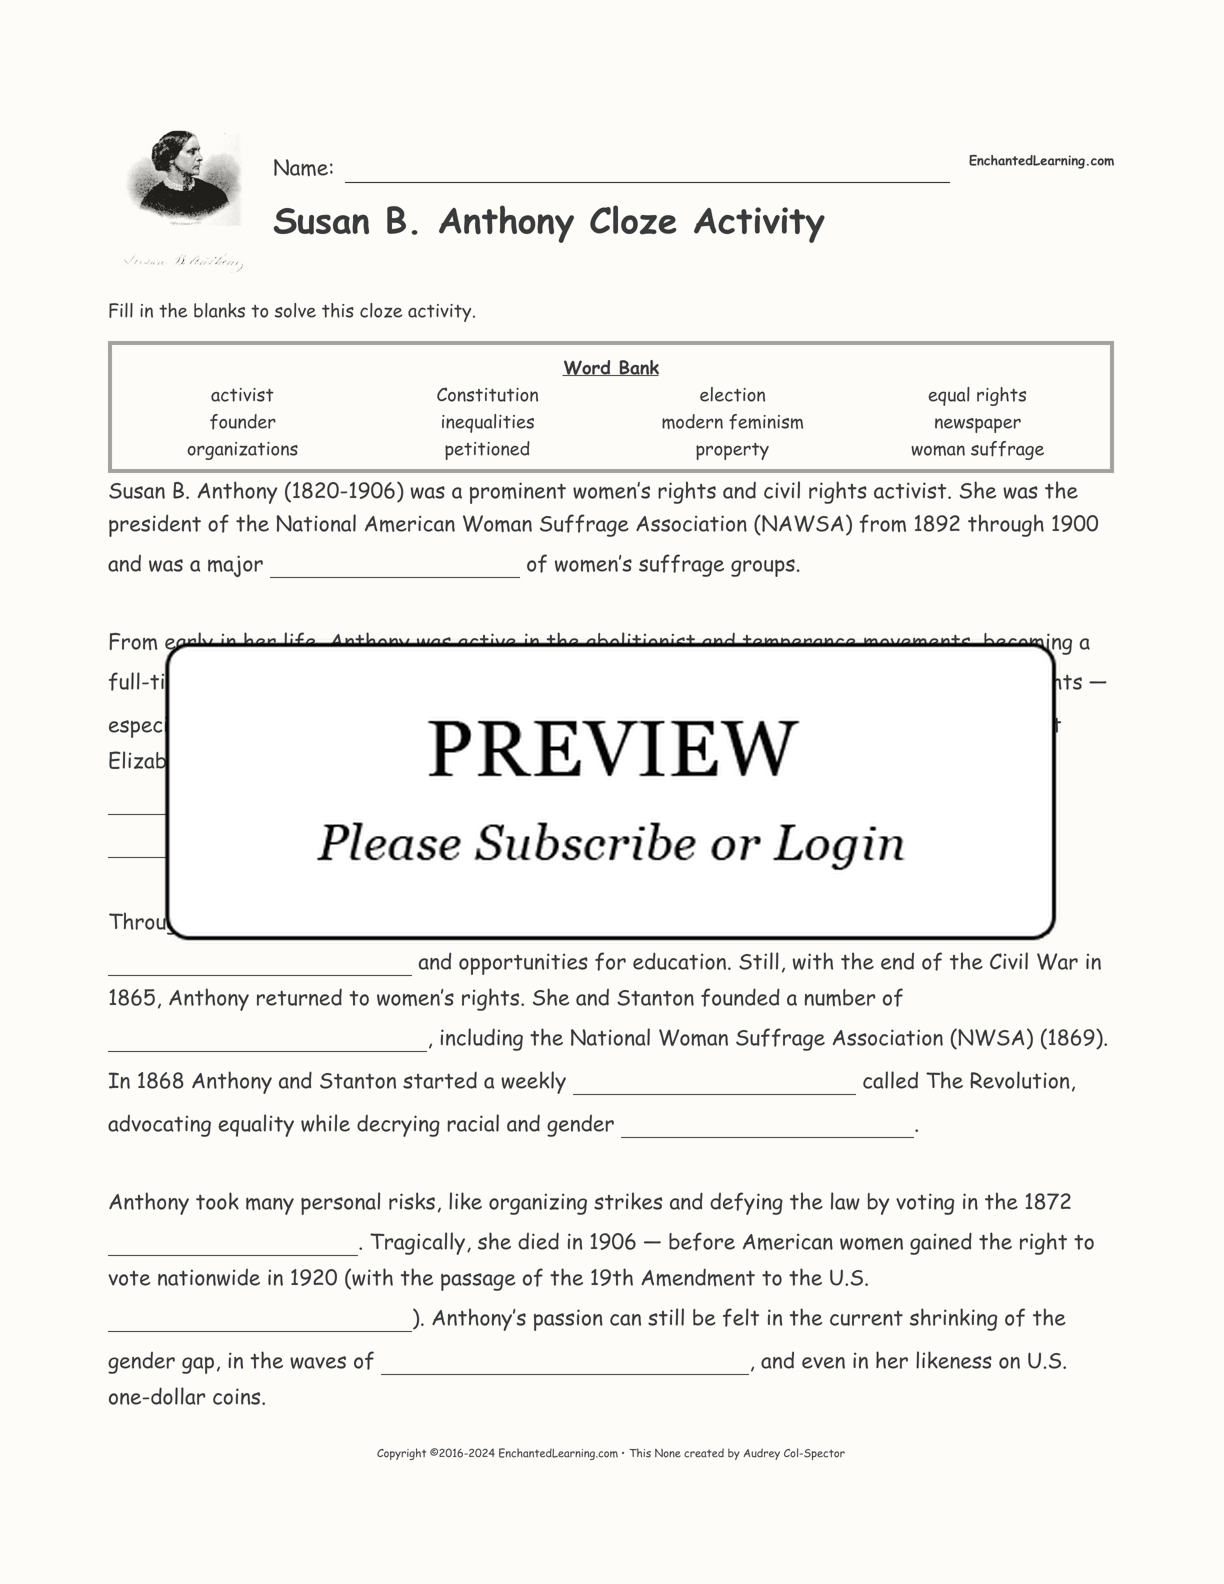 Susan B. Anthony Cloze Activity interactive worksheet page 1